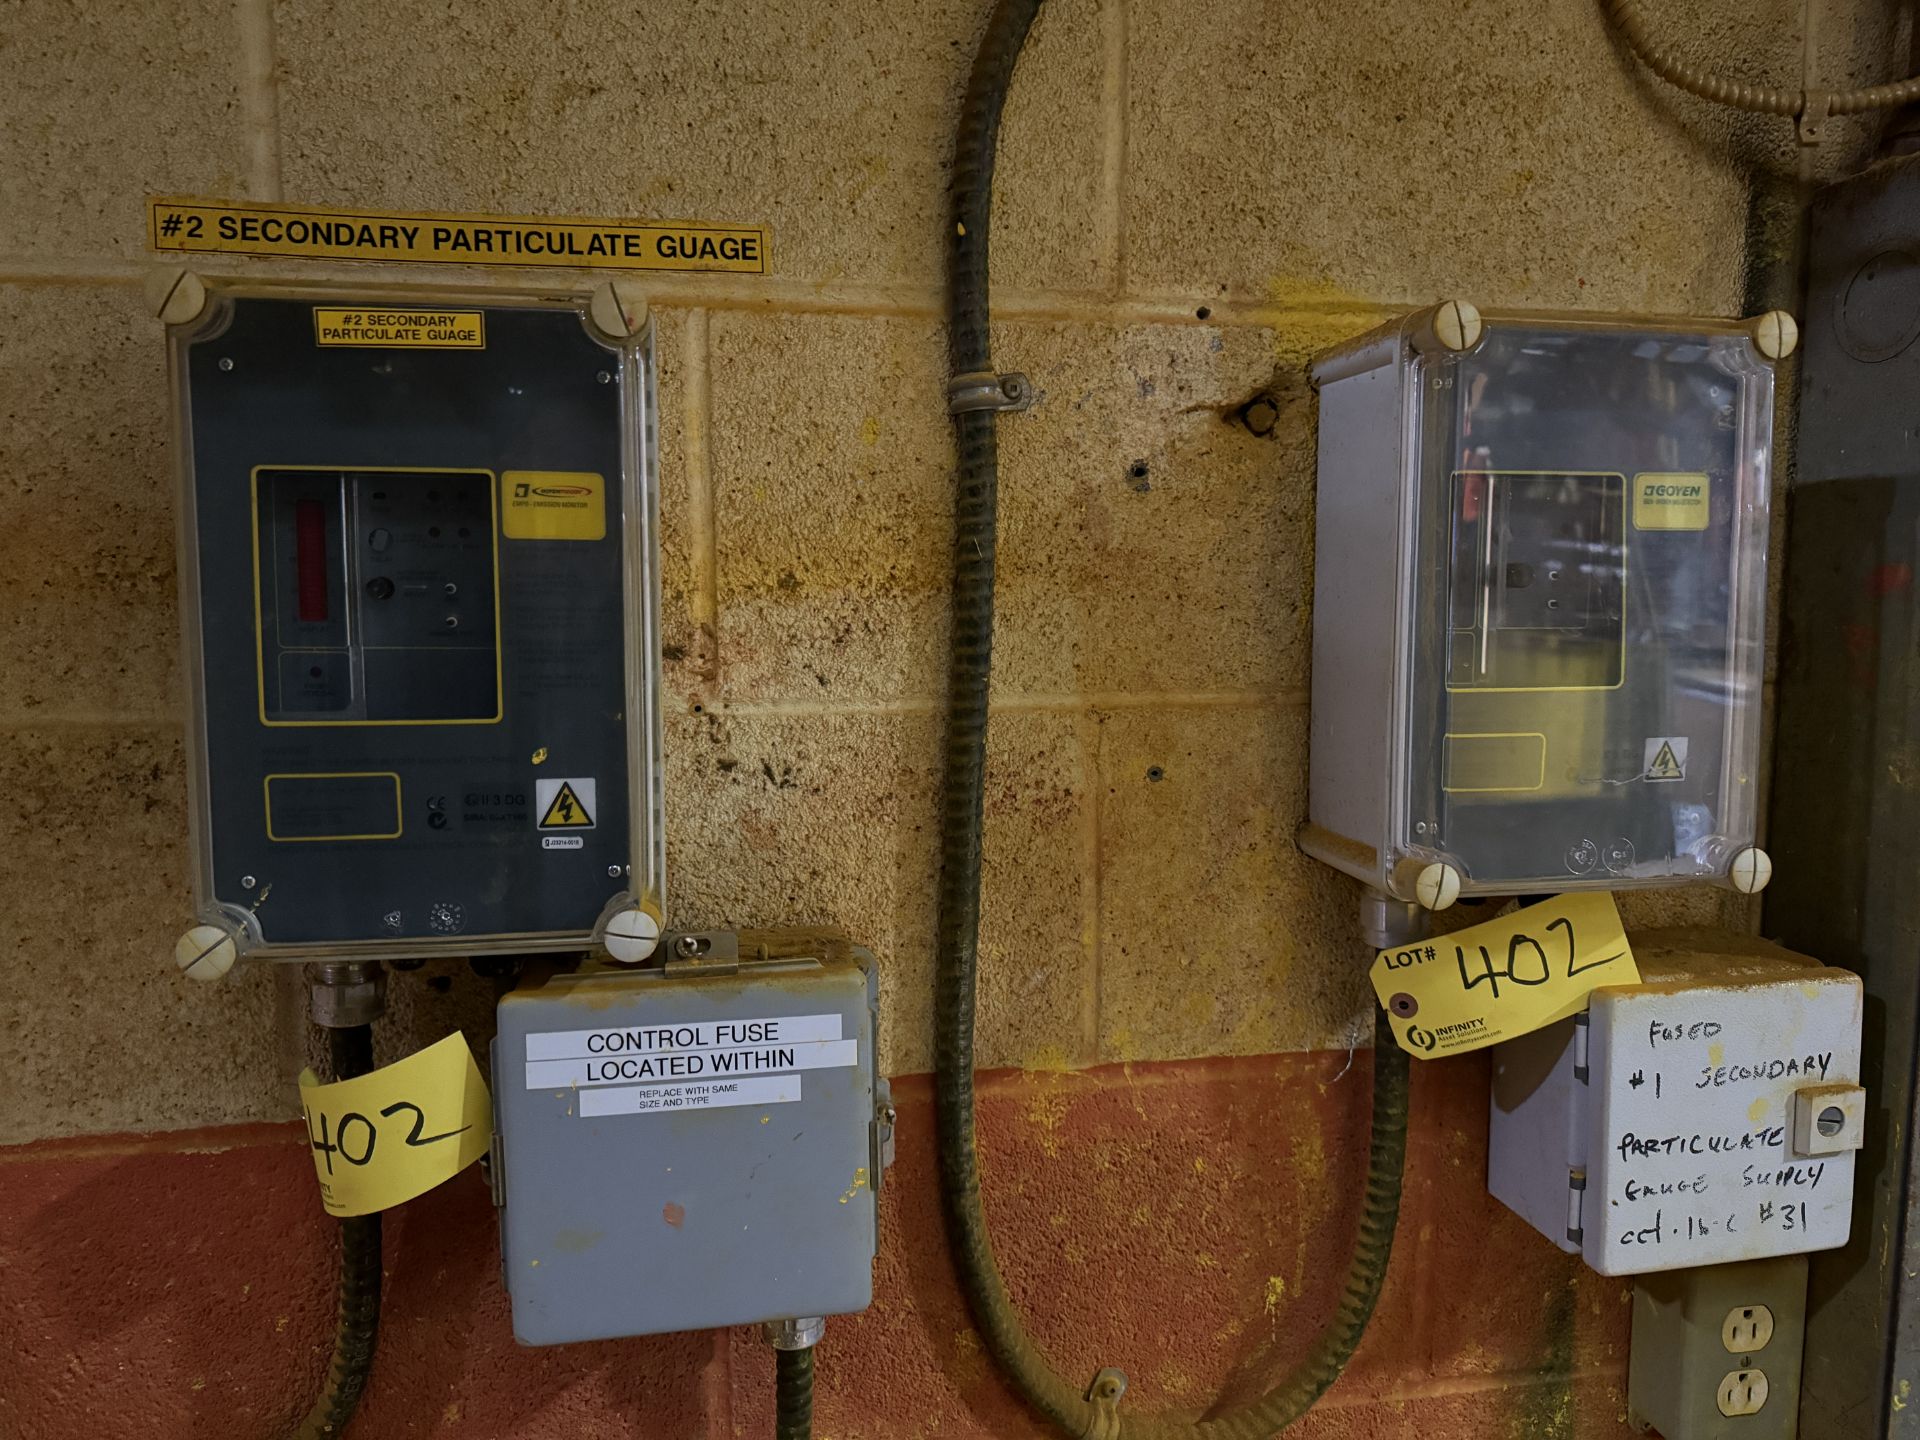 LOT OF (2) ARCTIC COMBUTION LTD CONTROL PANELS W/ HONEYWELL BURMIER CONTROL AND EXPANDED ANNUMCIATOR - Image 5 of 5